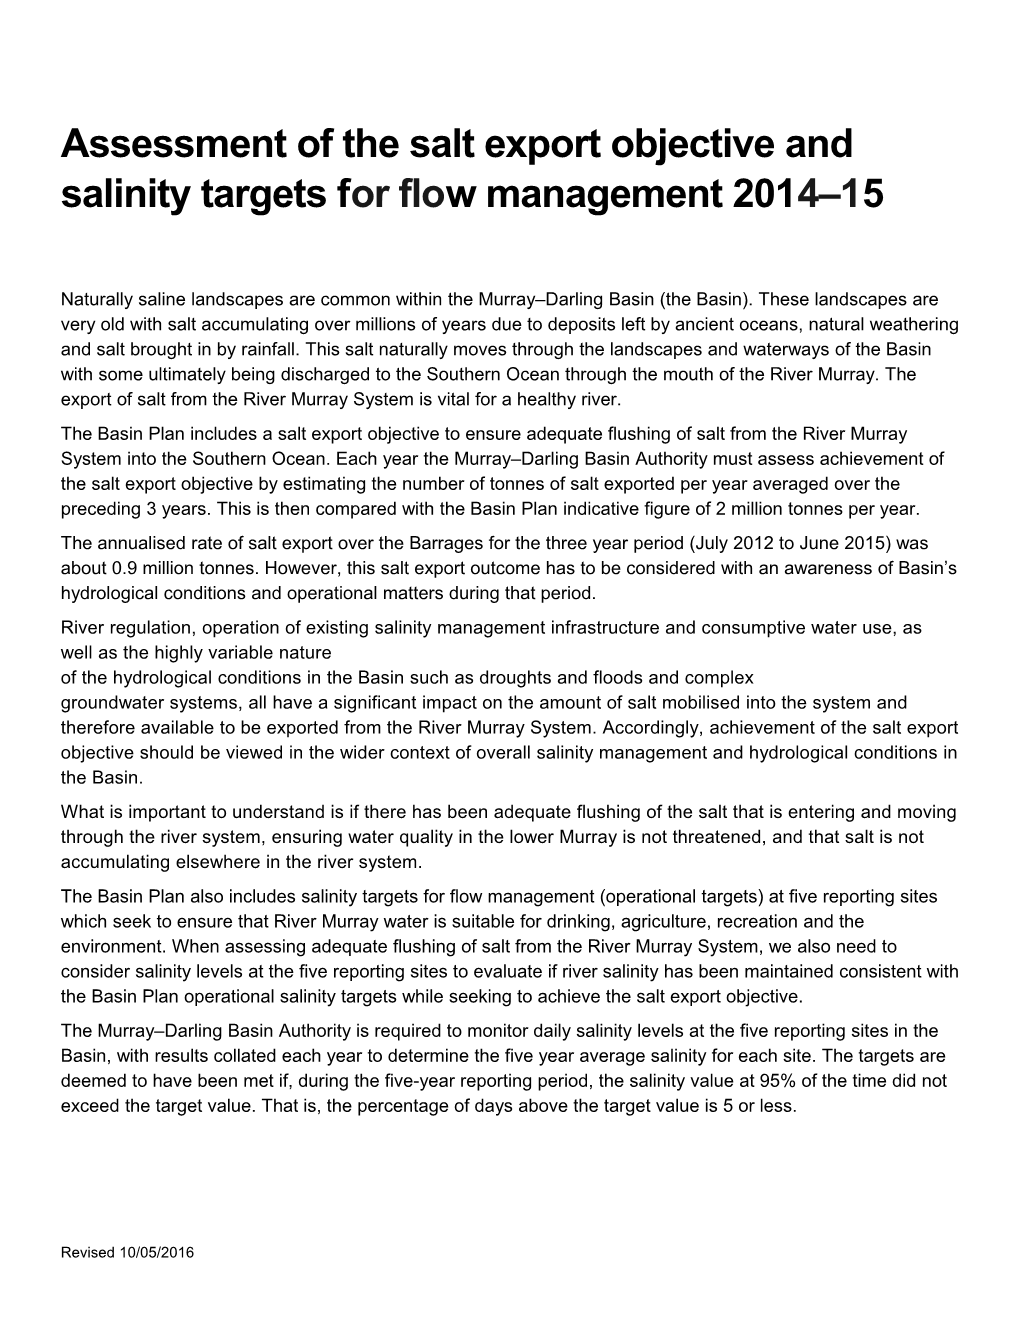 Assessment of Salt Export Objective and Salinity Targets Flow Management 2014-15